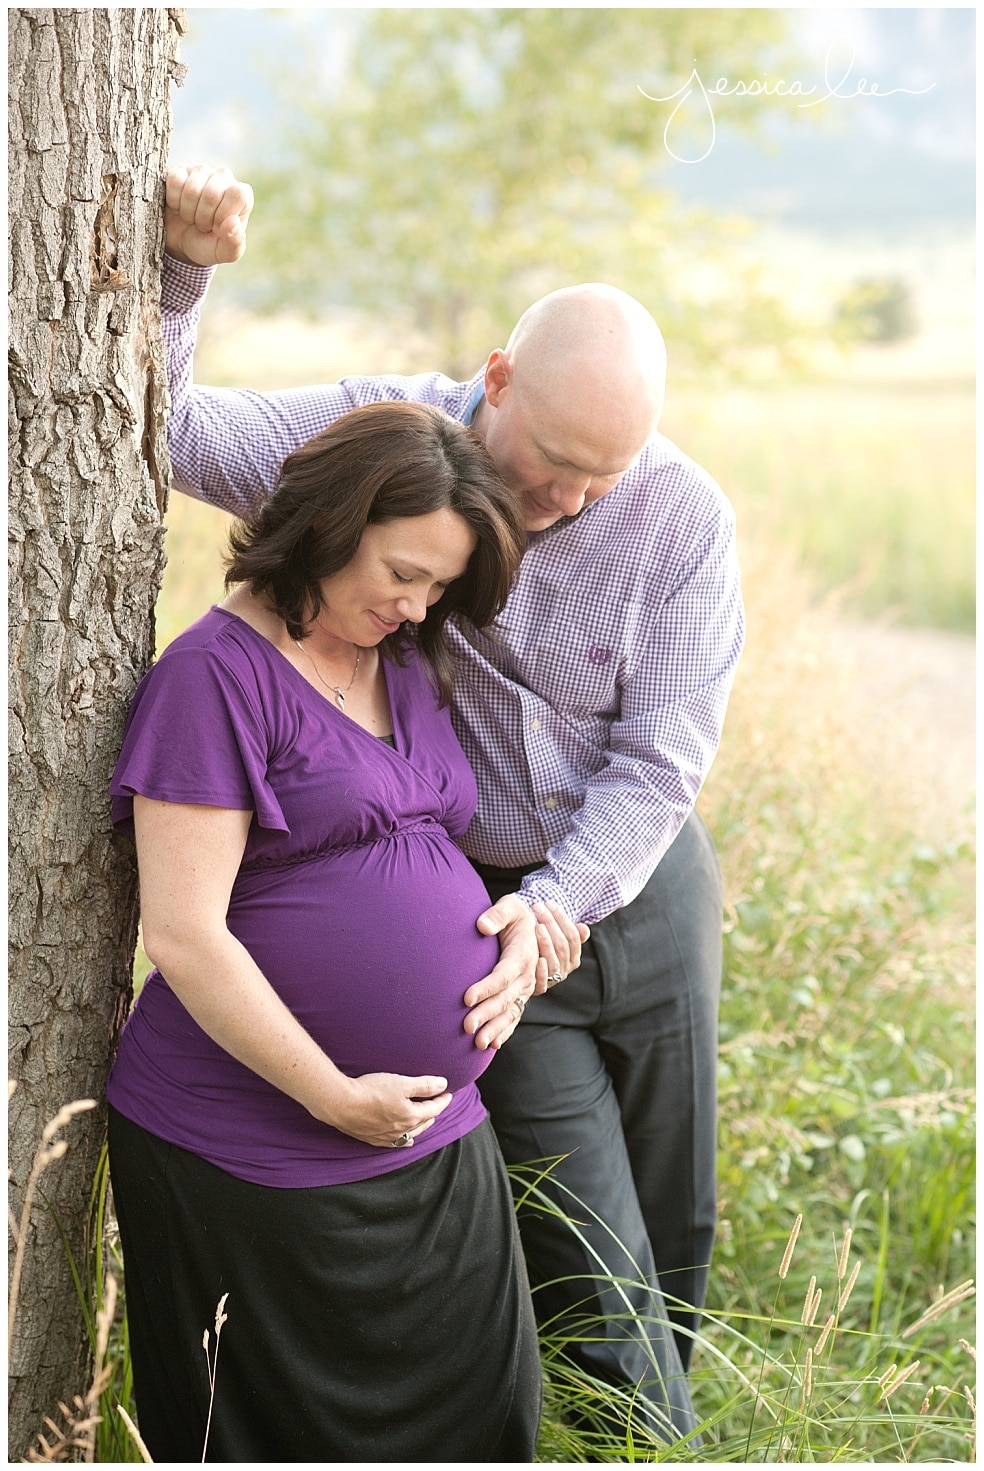 expecting mother by tree with husband in purple shirt, colorado maternity photographer